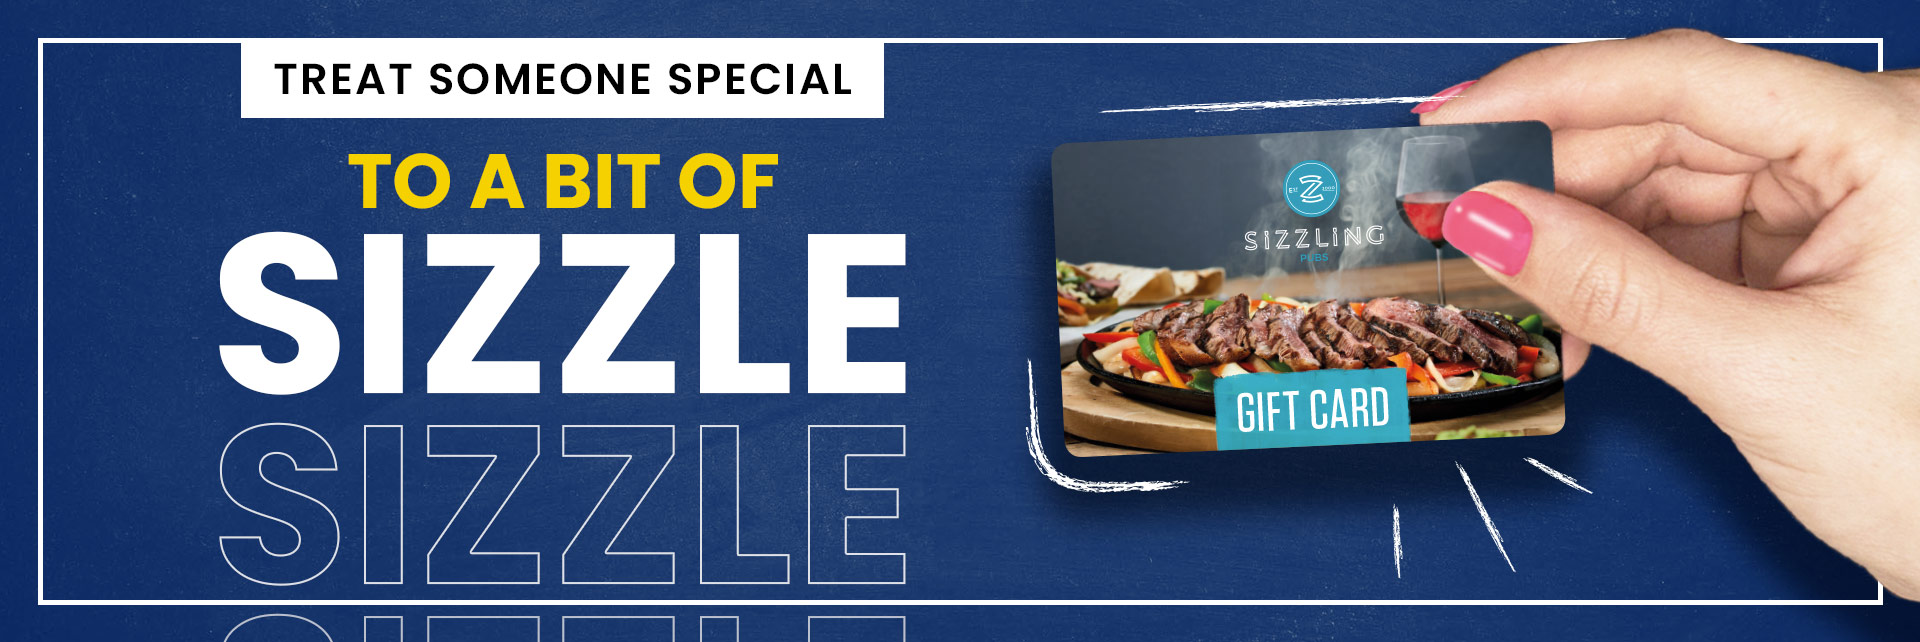 Sizzling Pubs Gift Card at The White Rose in Sheffield